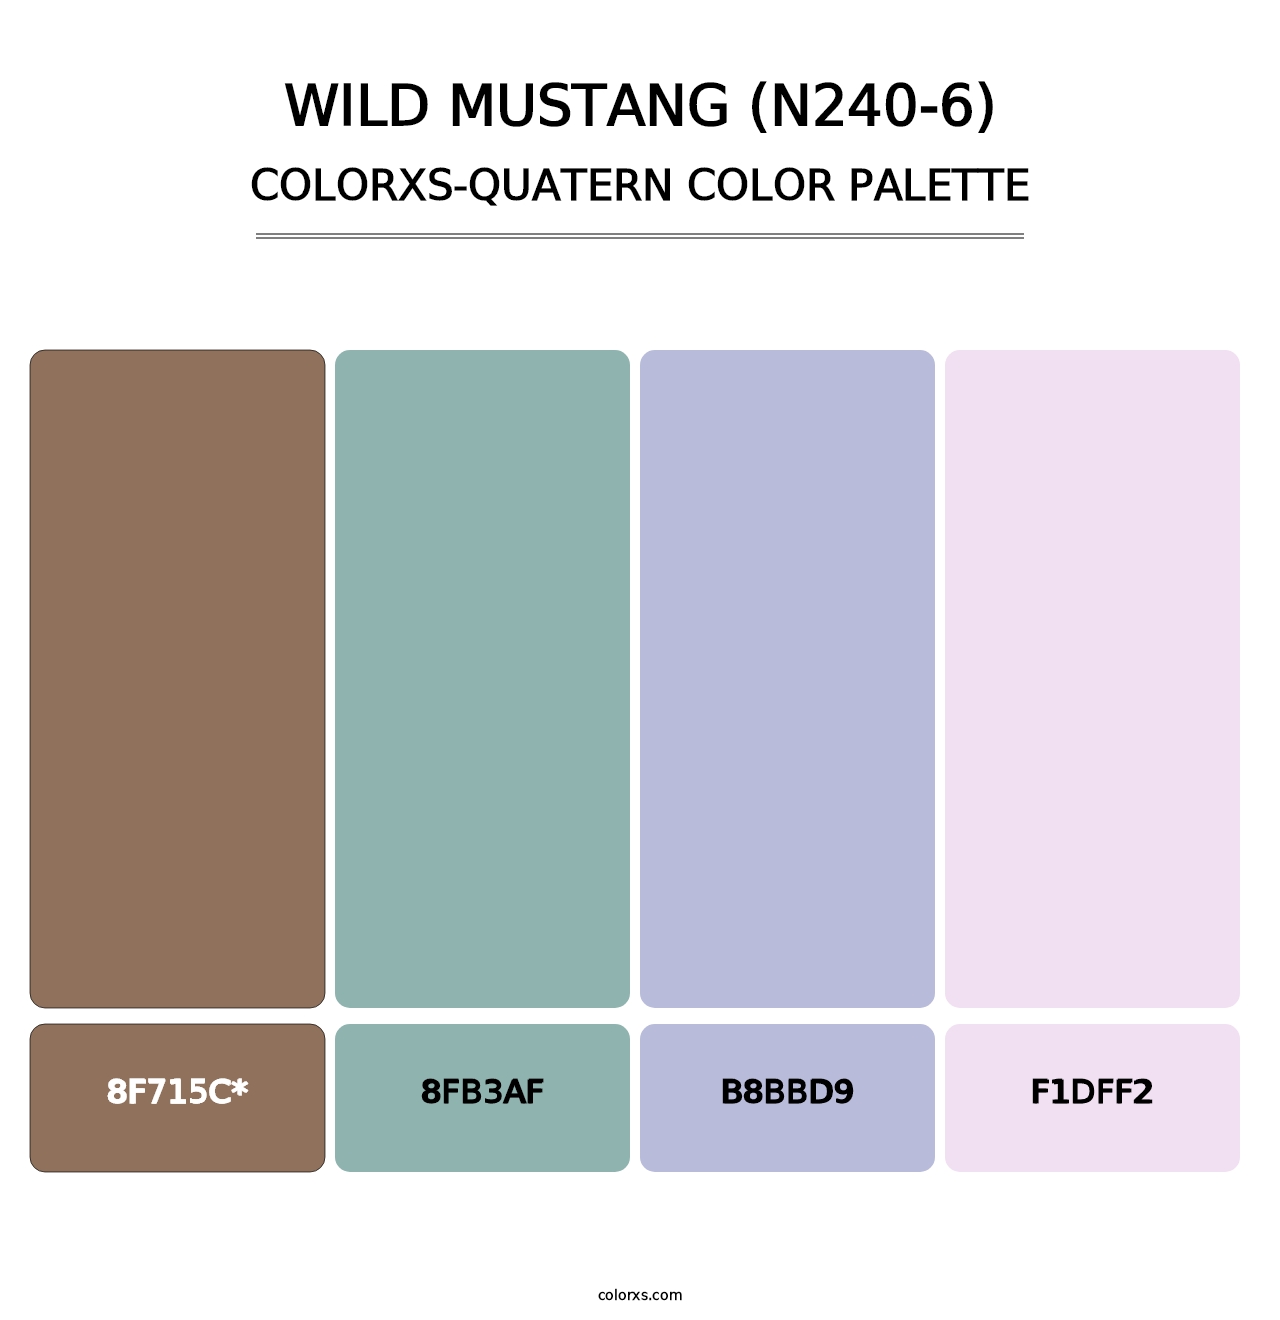 Wild Mustang (N240-6) - Colorxs Quatern Palette